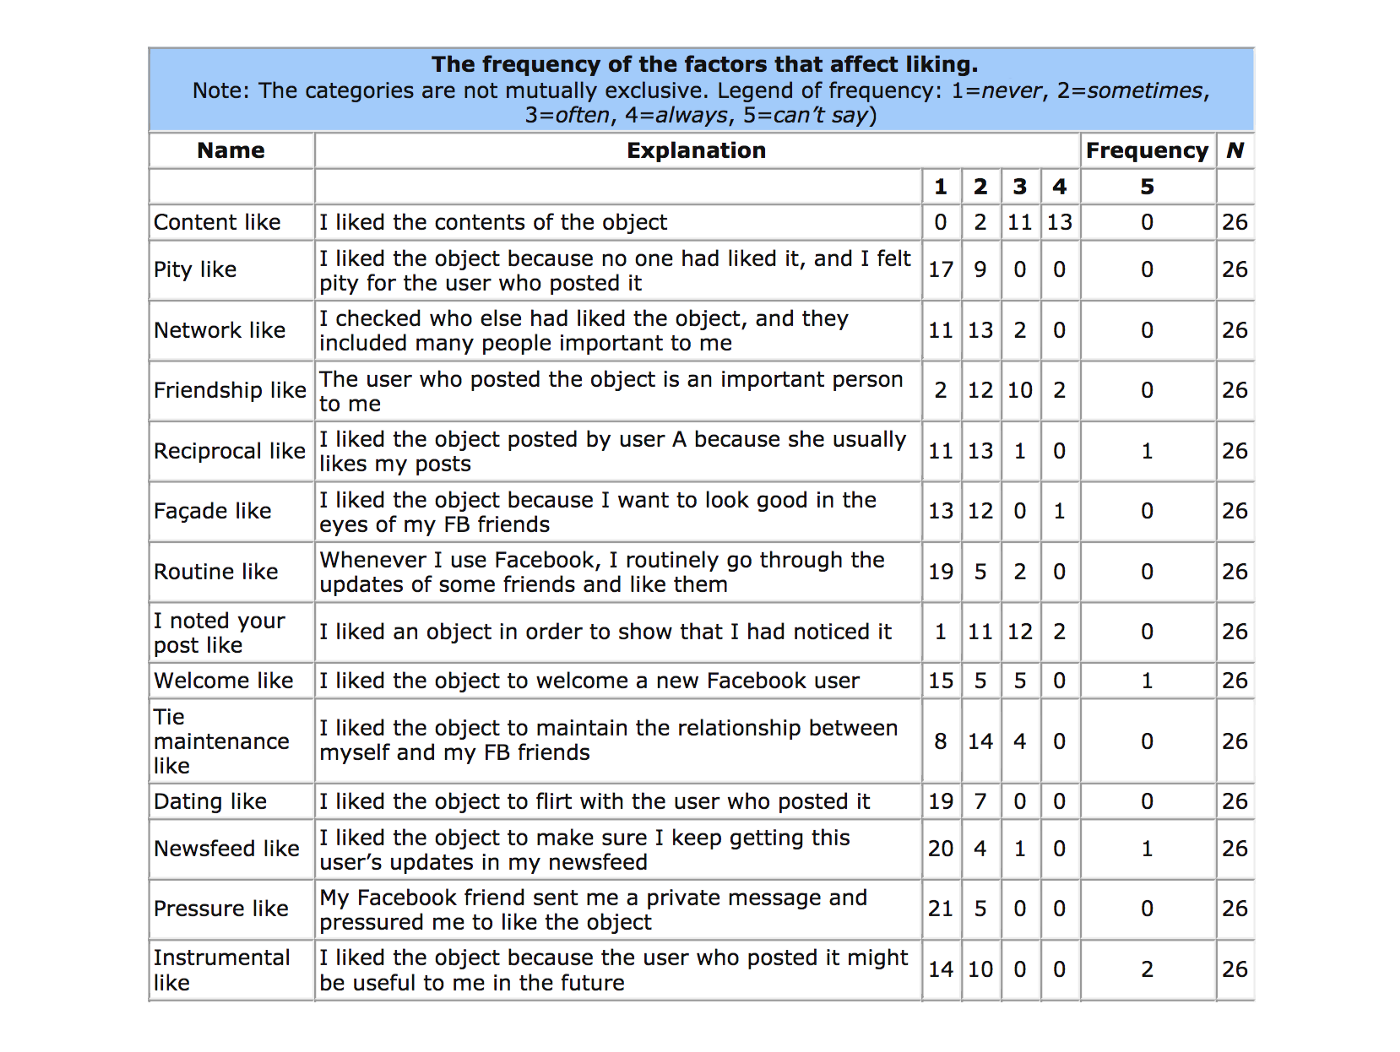 Table 1: The frequency of the factors that affect liking